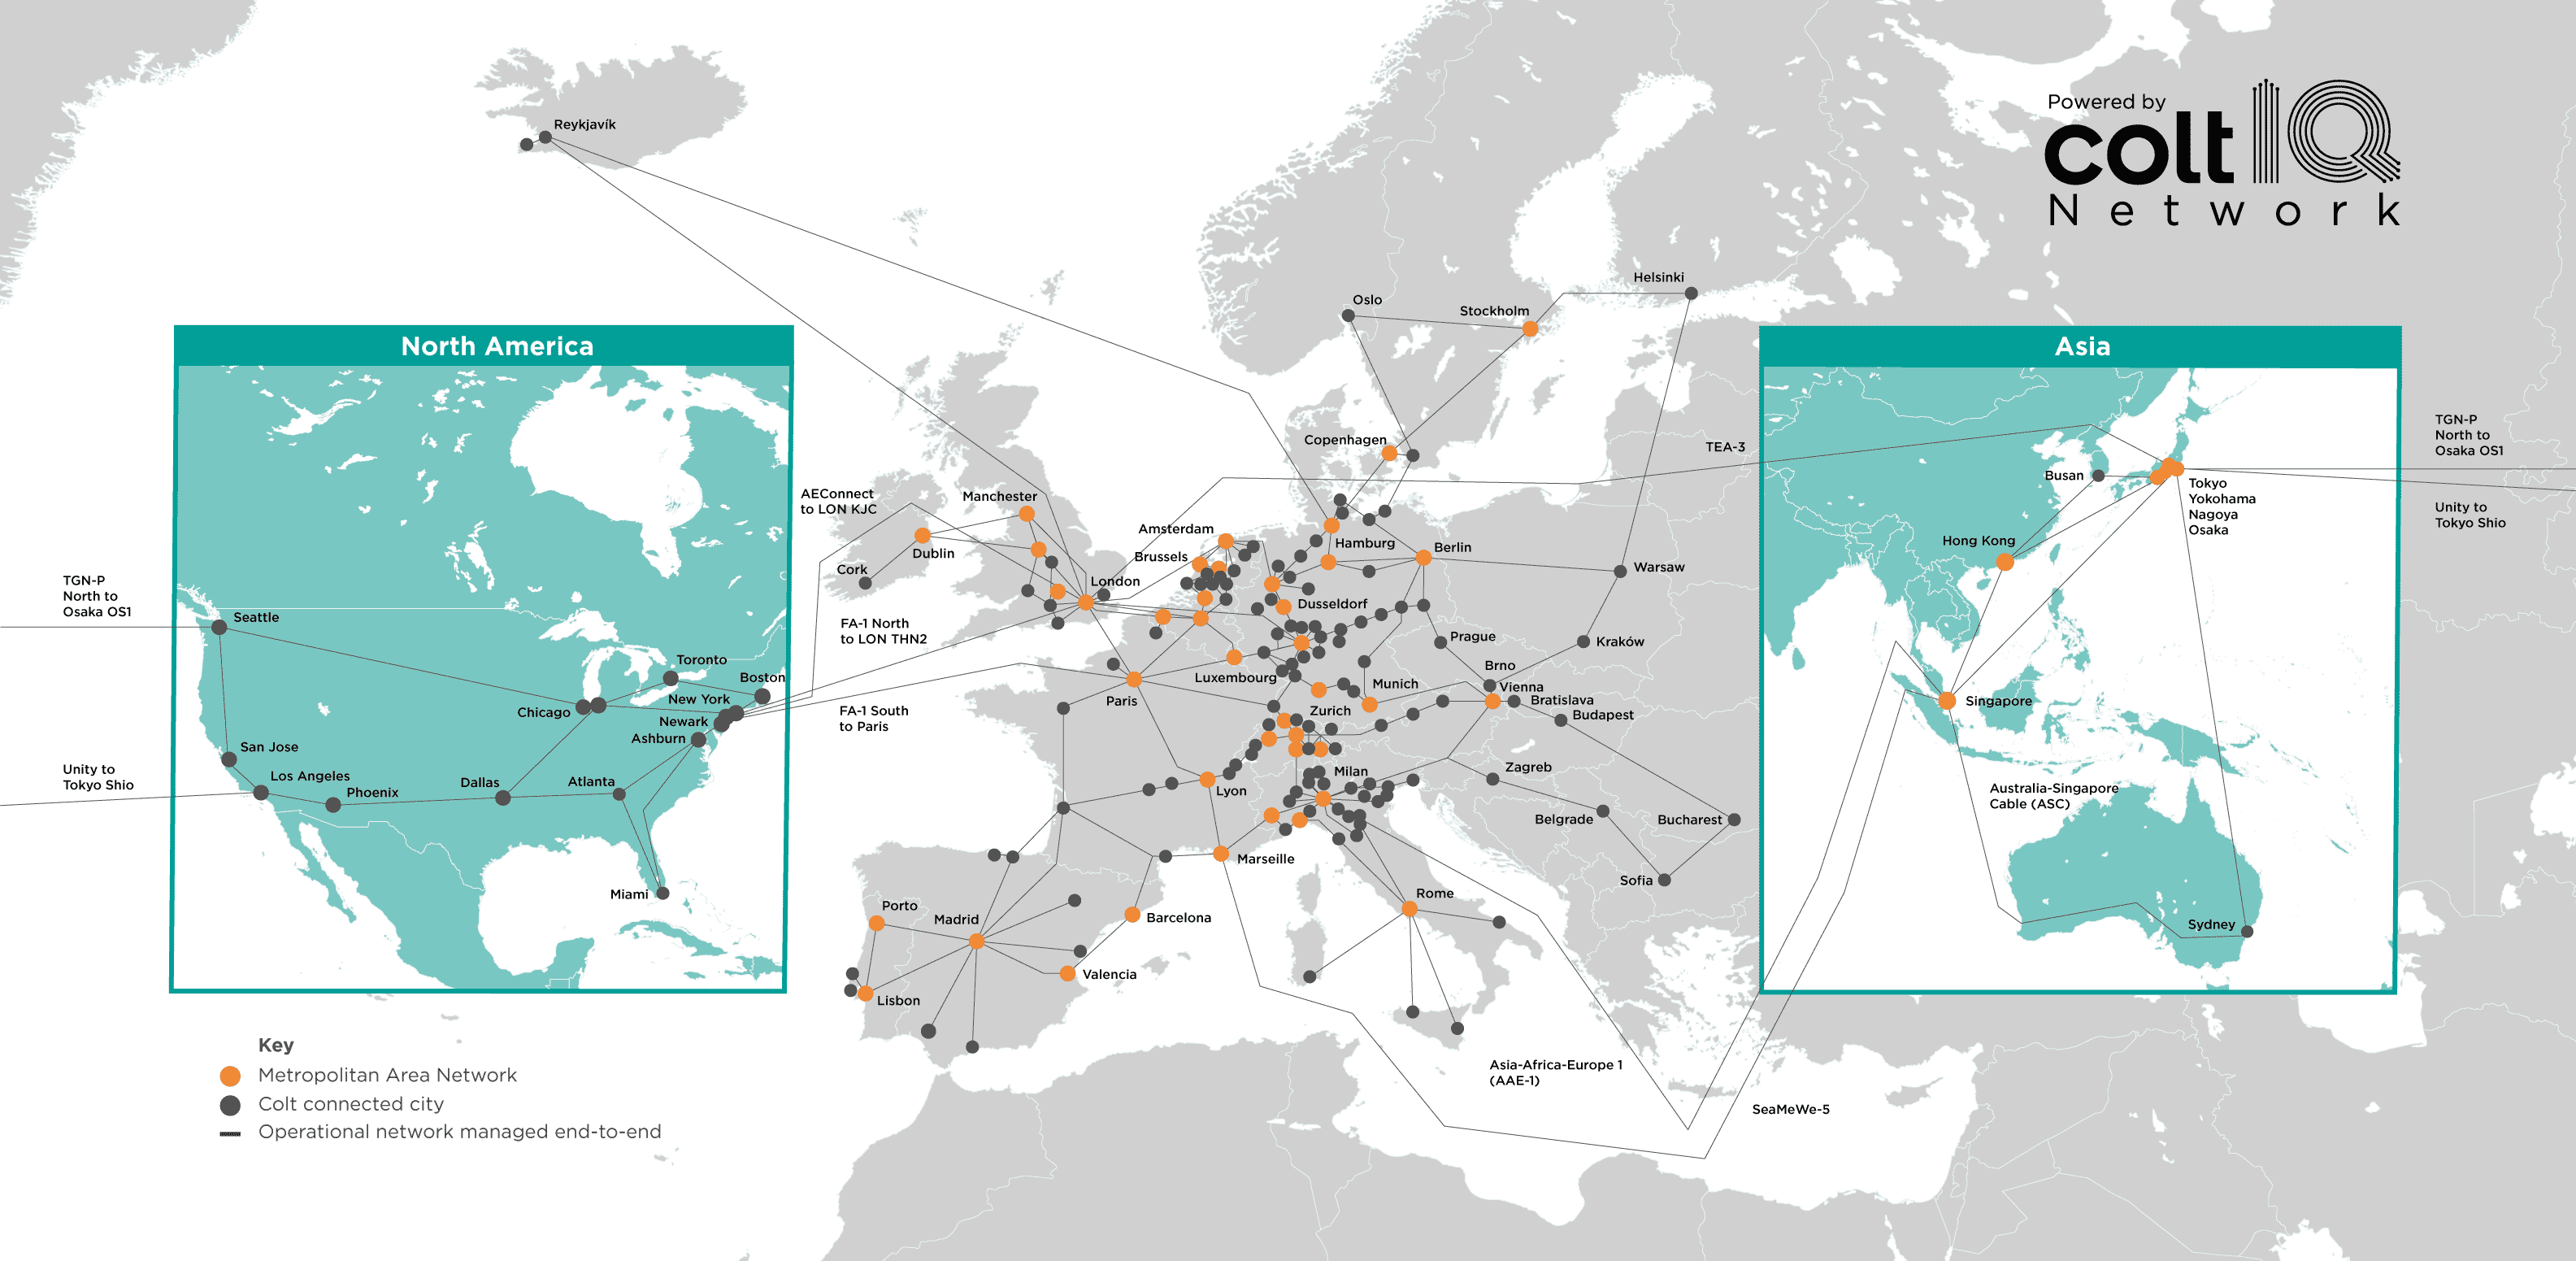 colt-map-of-network-coverage